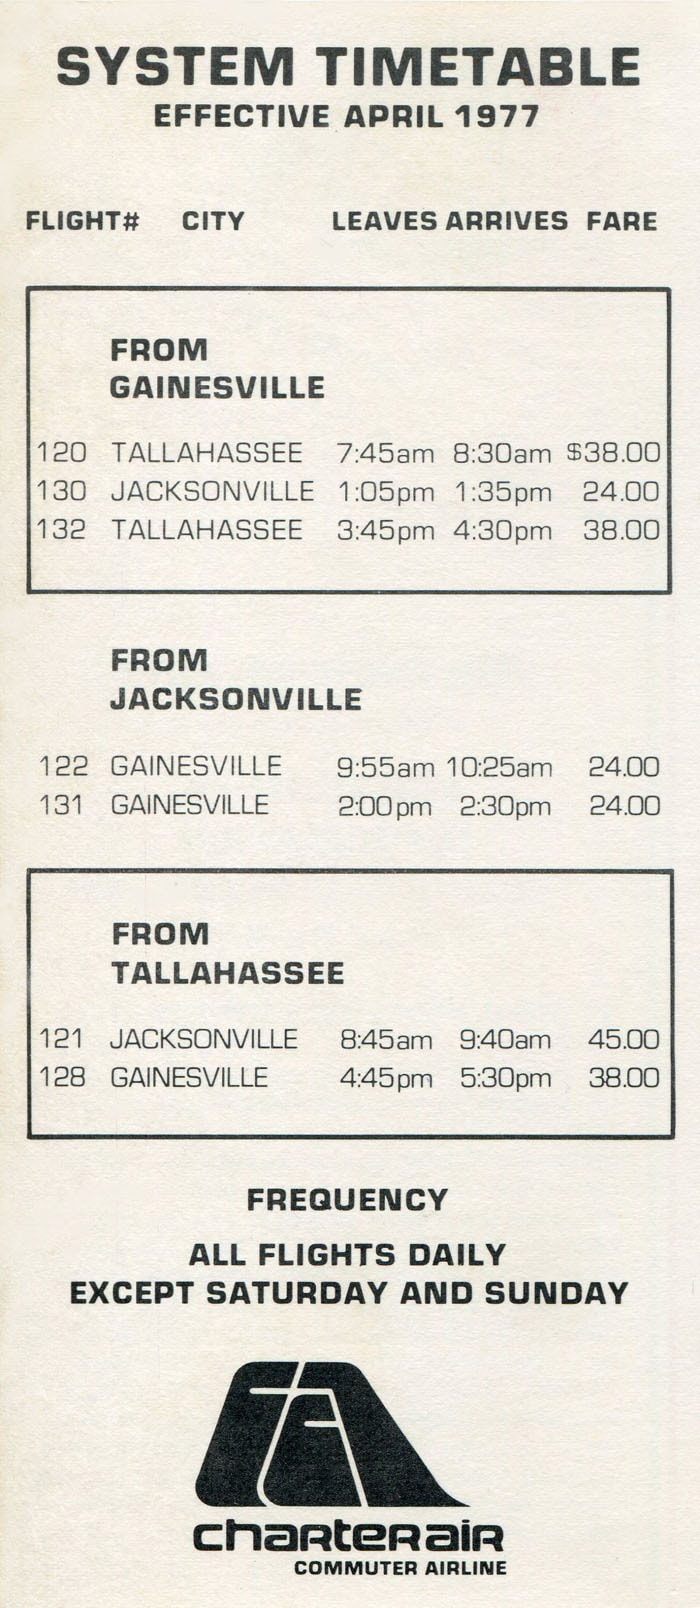 Charter Air Commuter Airline timetable